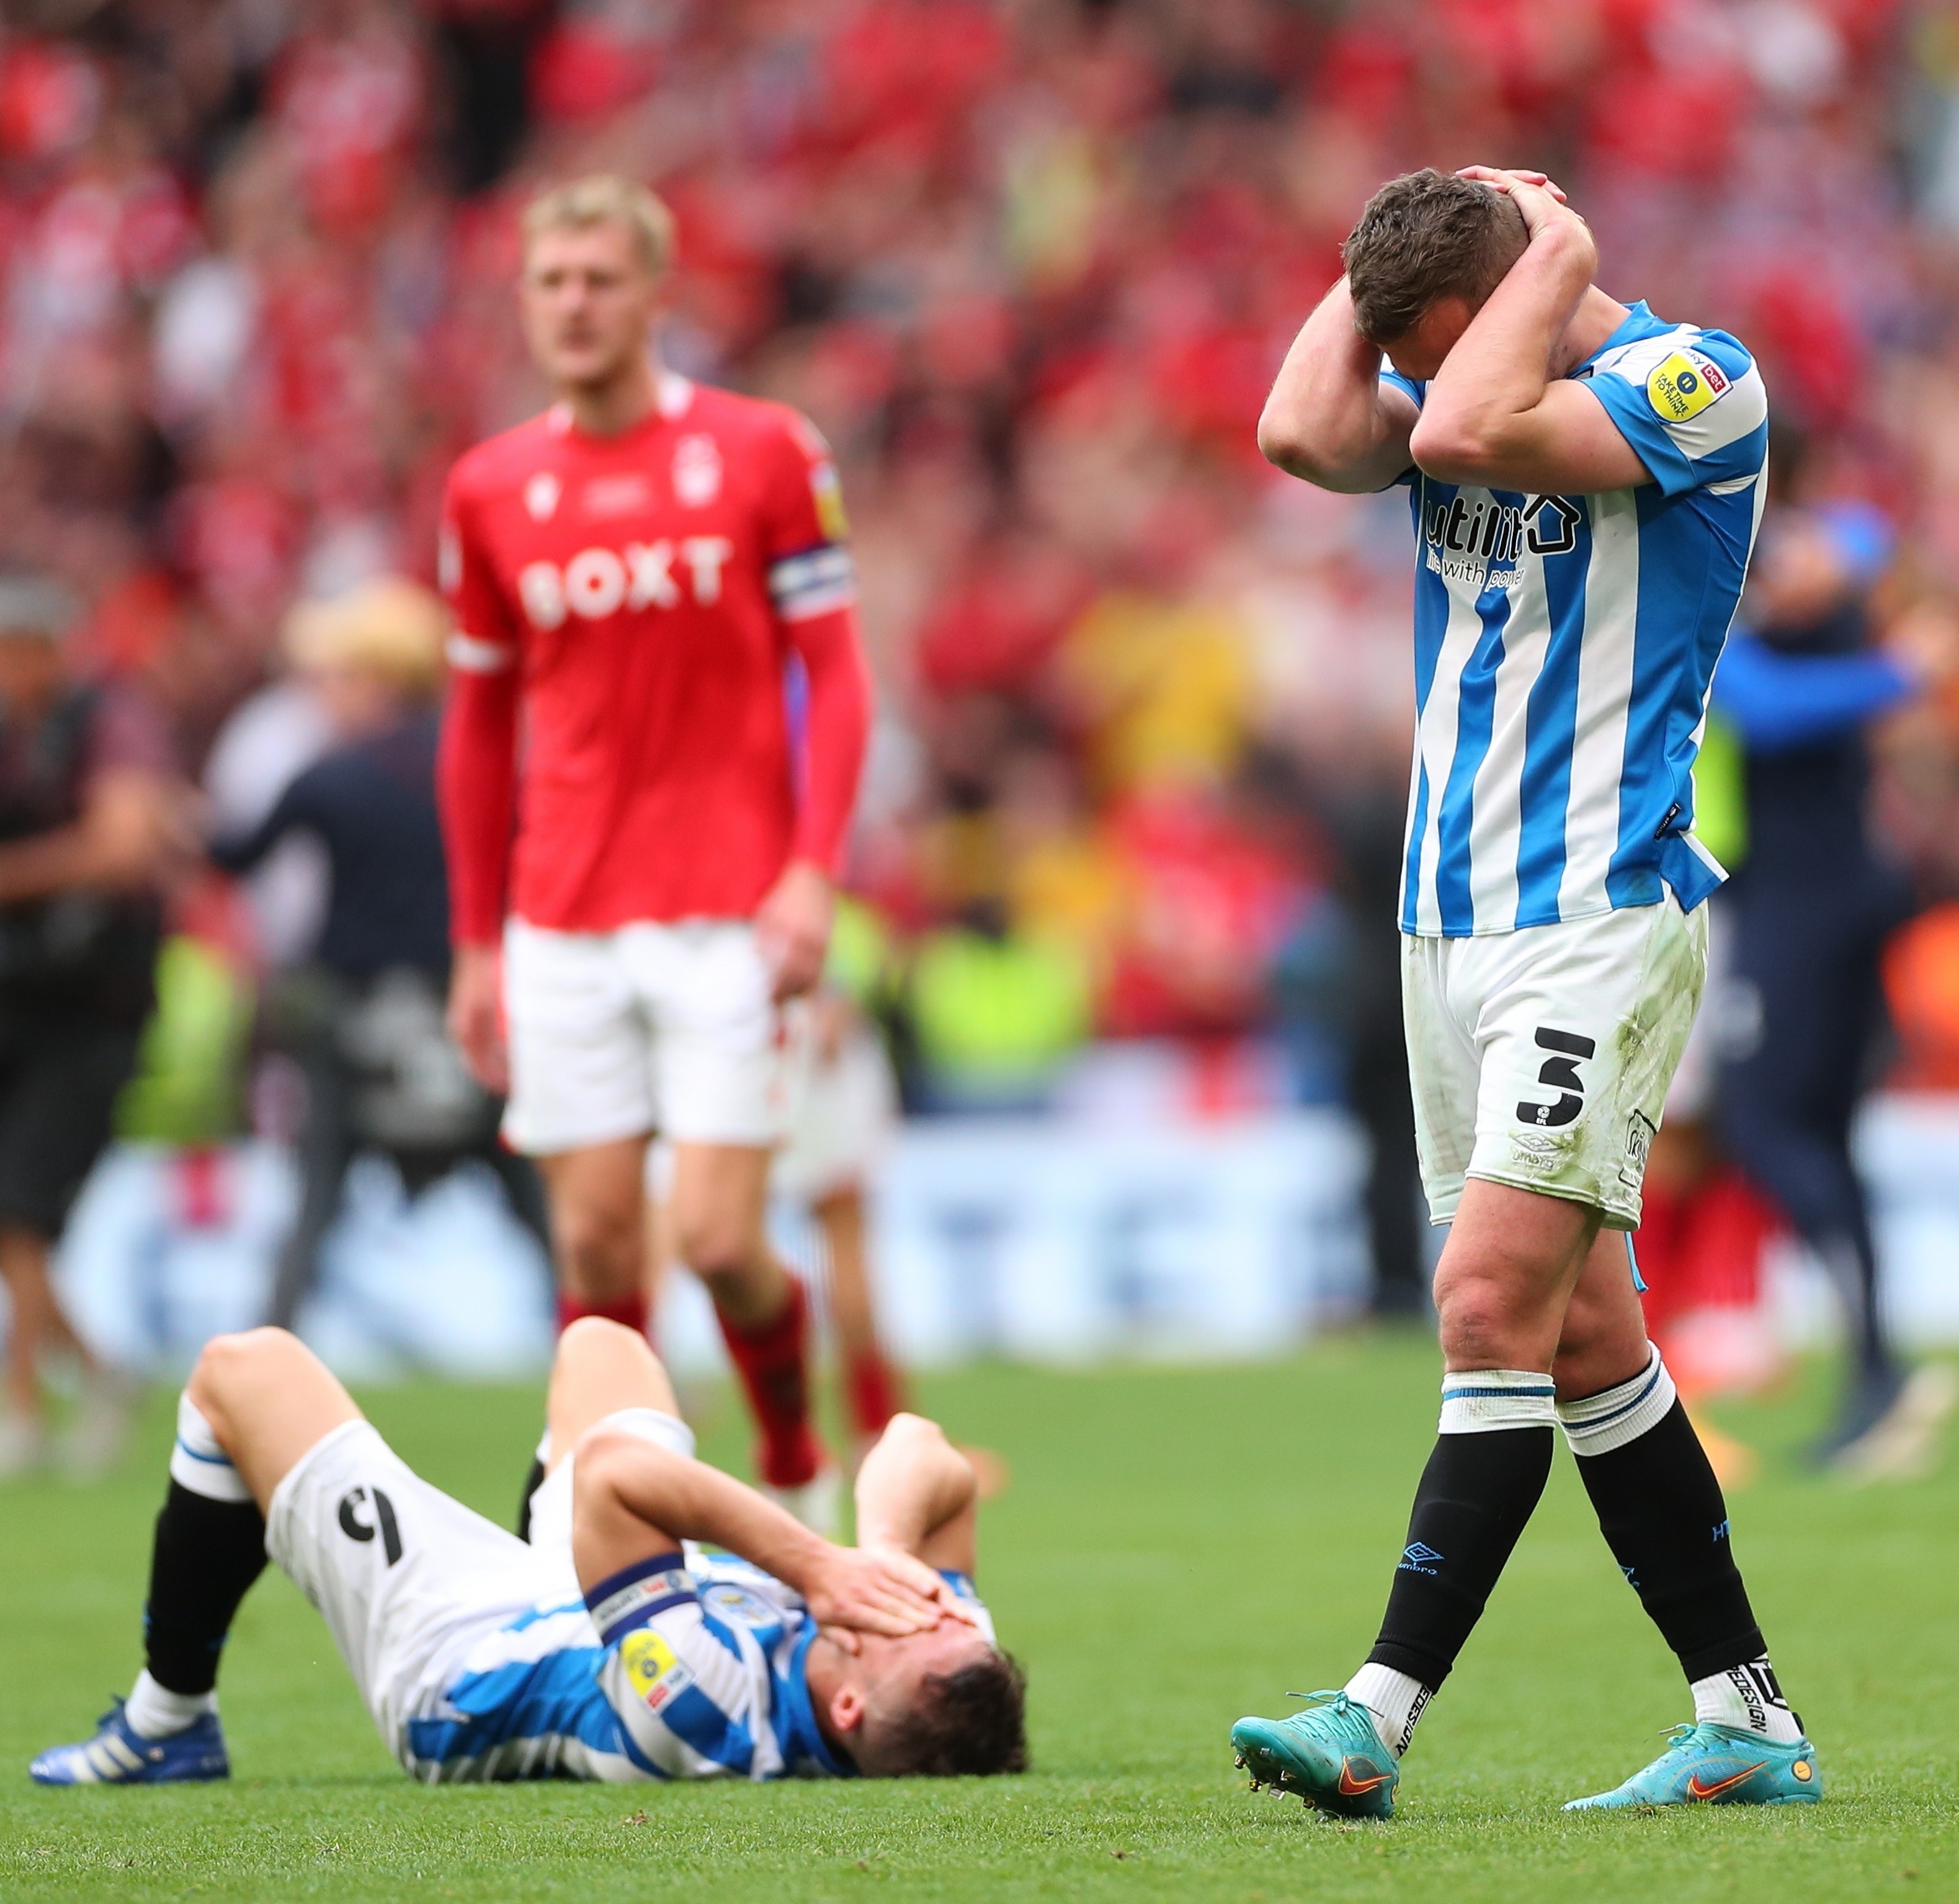 LONDON, ENGLAND - MAY 29: Harry Toffolo of Huddersfield Town dejected at full time of the Sky Bet Championship Play-Off Final match between Huddersfield Town and Nottingham Forest at Wembley Stadium on May 29, 2022 in London, England. (Photo by Robbie Jay Barratt - AMA/Getty Images)